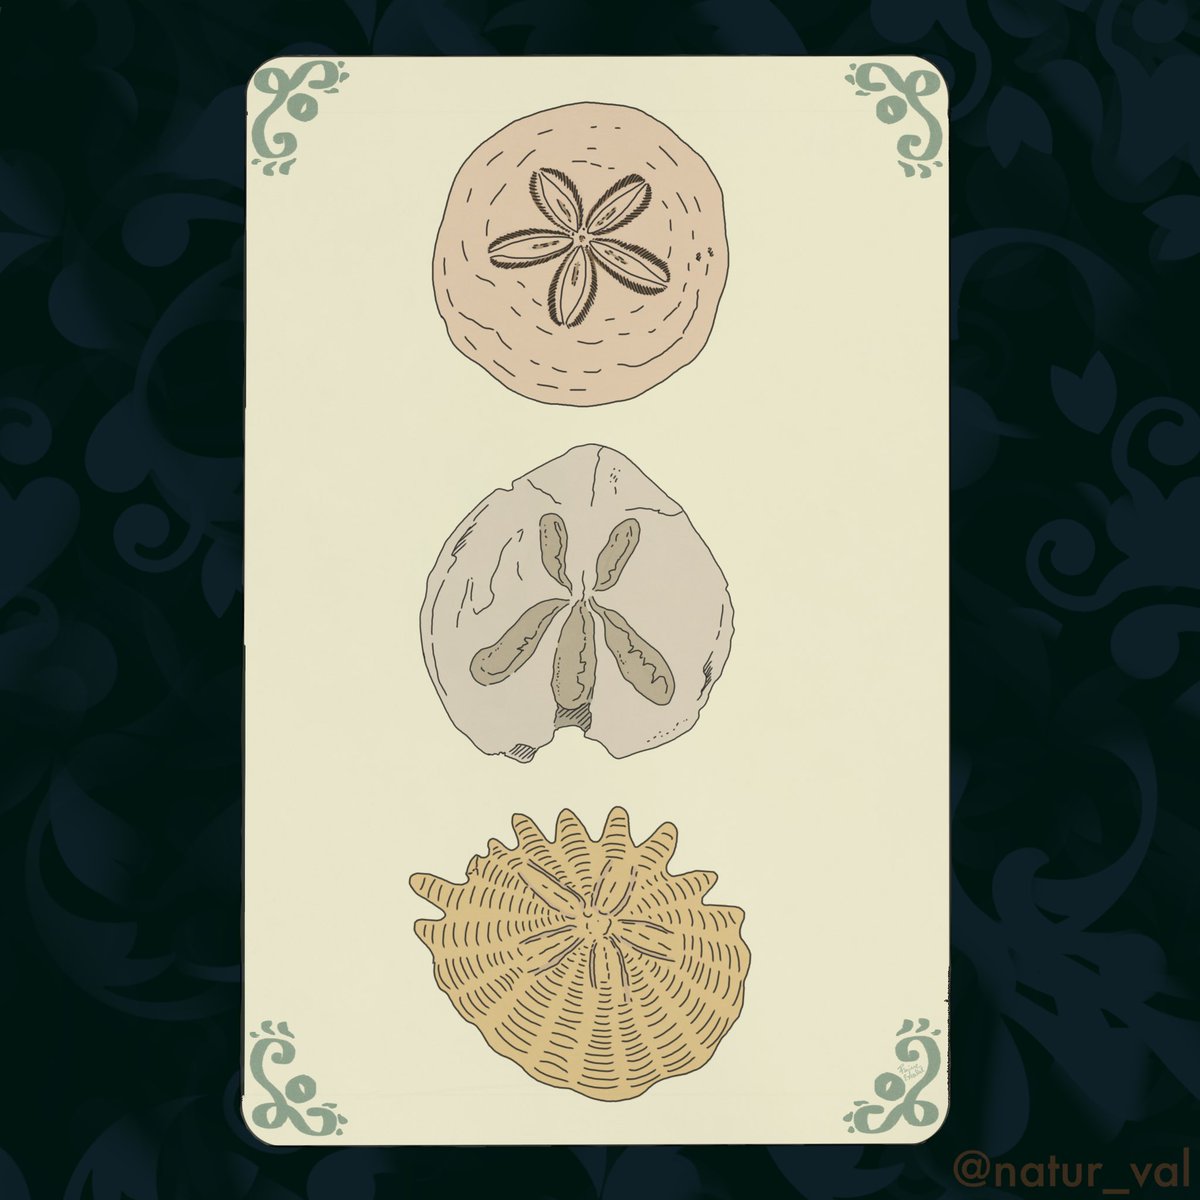 Tarots Before Time - Deniers. The suit of Pentacles. I chose “sand dollars” fossils, i.e. echinoids of the Dendrasteridae family characterized by a rounded and flattened shape that resembles a coin. P.S. There are actually a couple of interlopers from other genres. 3: continuity